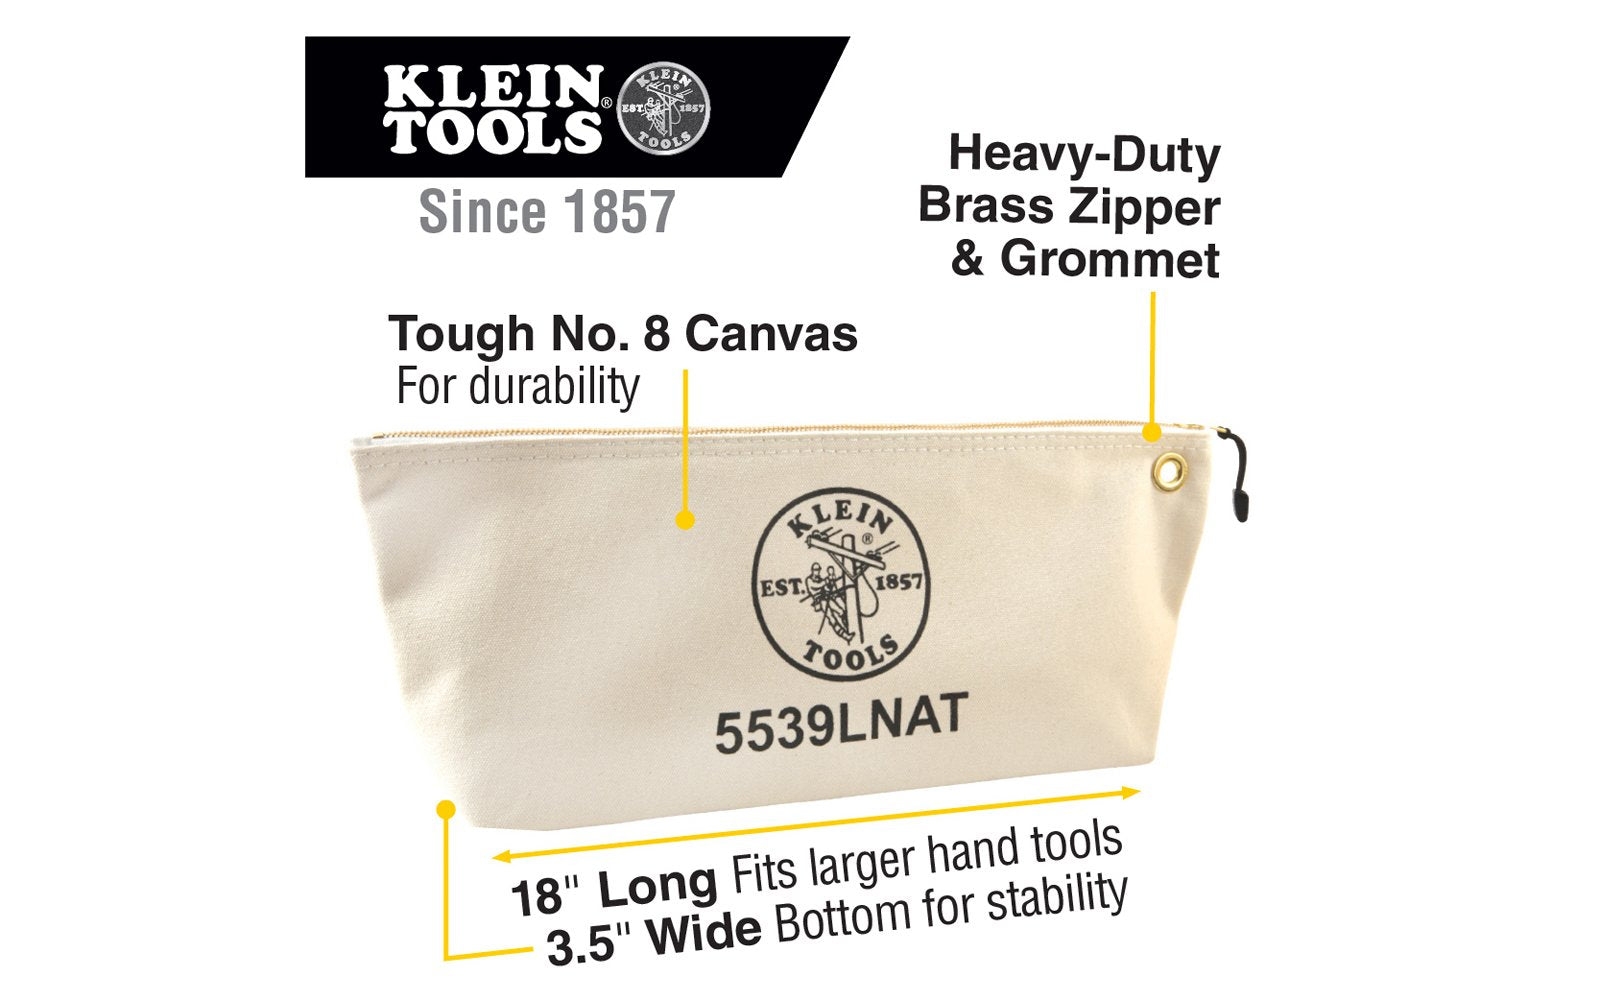 Klein Tools - Made in USA ~ Model 5539LNAT - Made of tough Canvas material - Klein Canvas Pouch - Large Klein Canvas Bag - Storage for pliers, wrenches, & other tools - Klein Canvas Zipper Bag - Made with tough No. 8 canvas for added durability - Heavy-duty zipper - 092644559266 - Long Klein Canvas Bag - Durable - 18"  x  8"  x  3-1/2" 